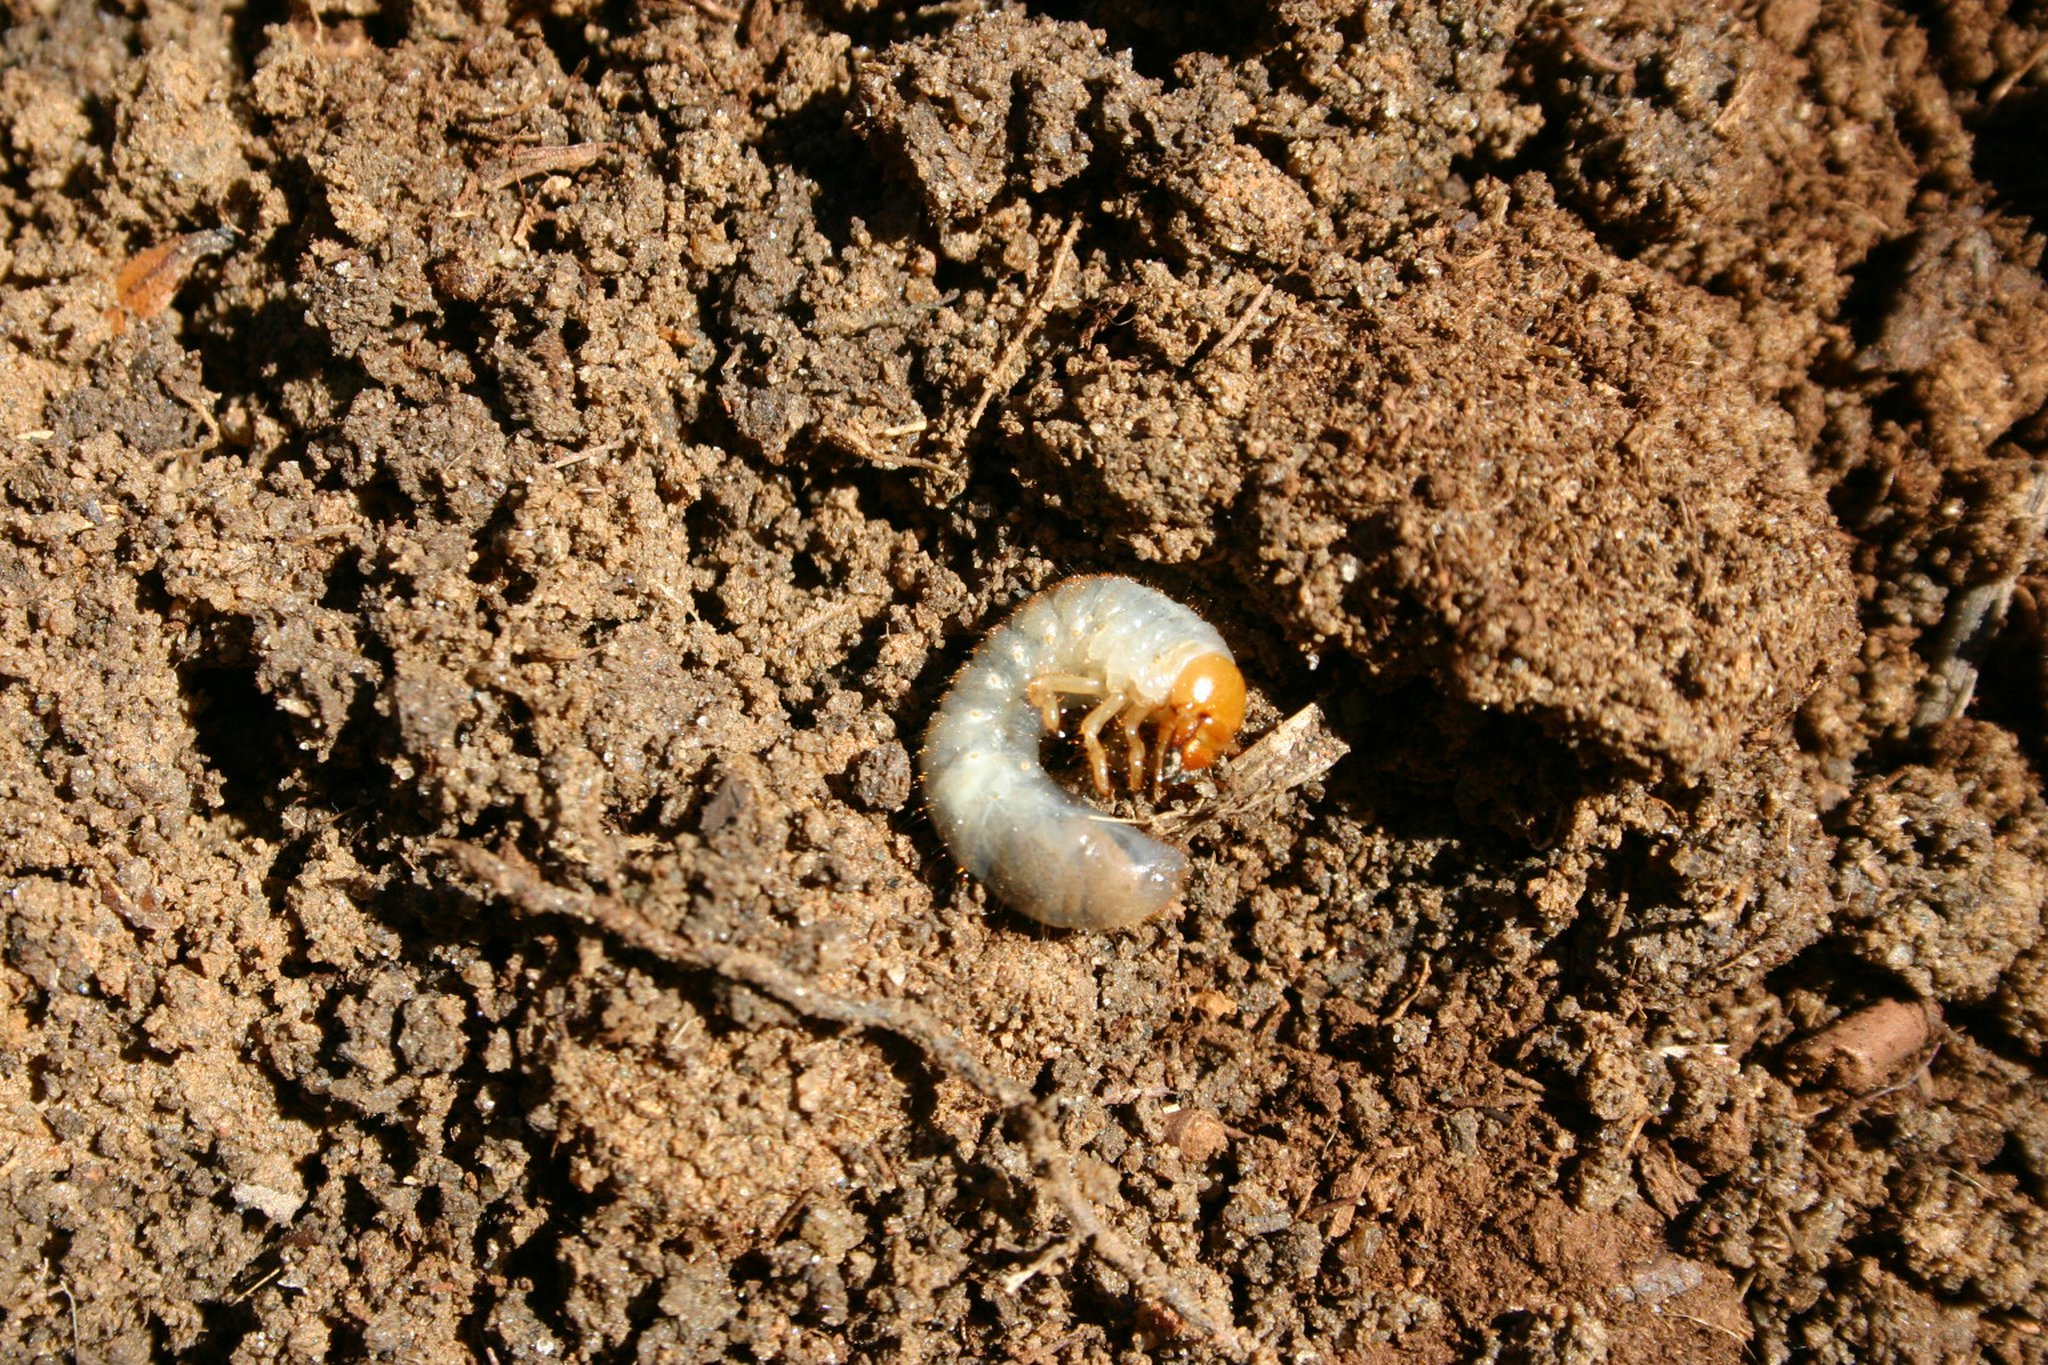 Are white grubs killing my plants?